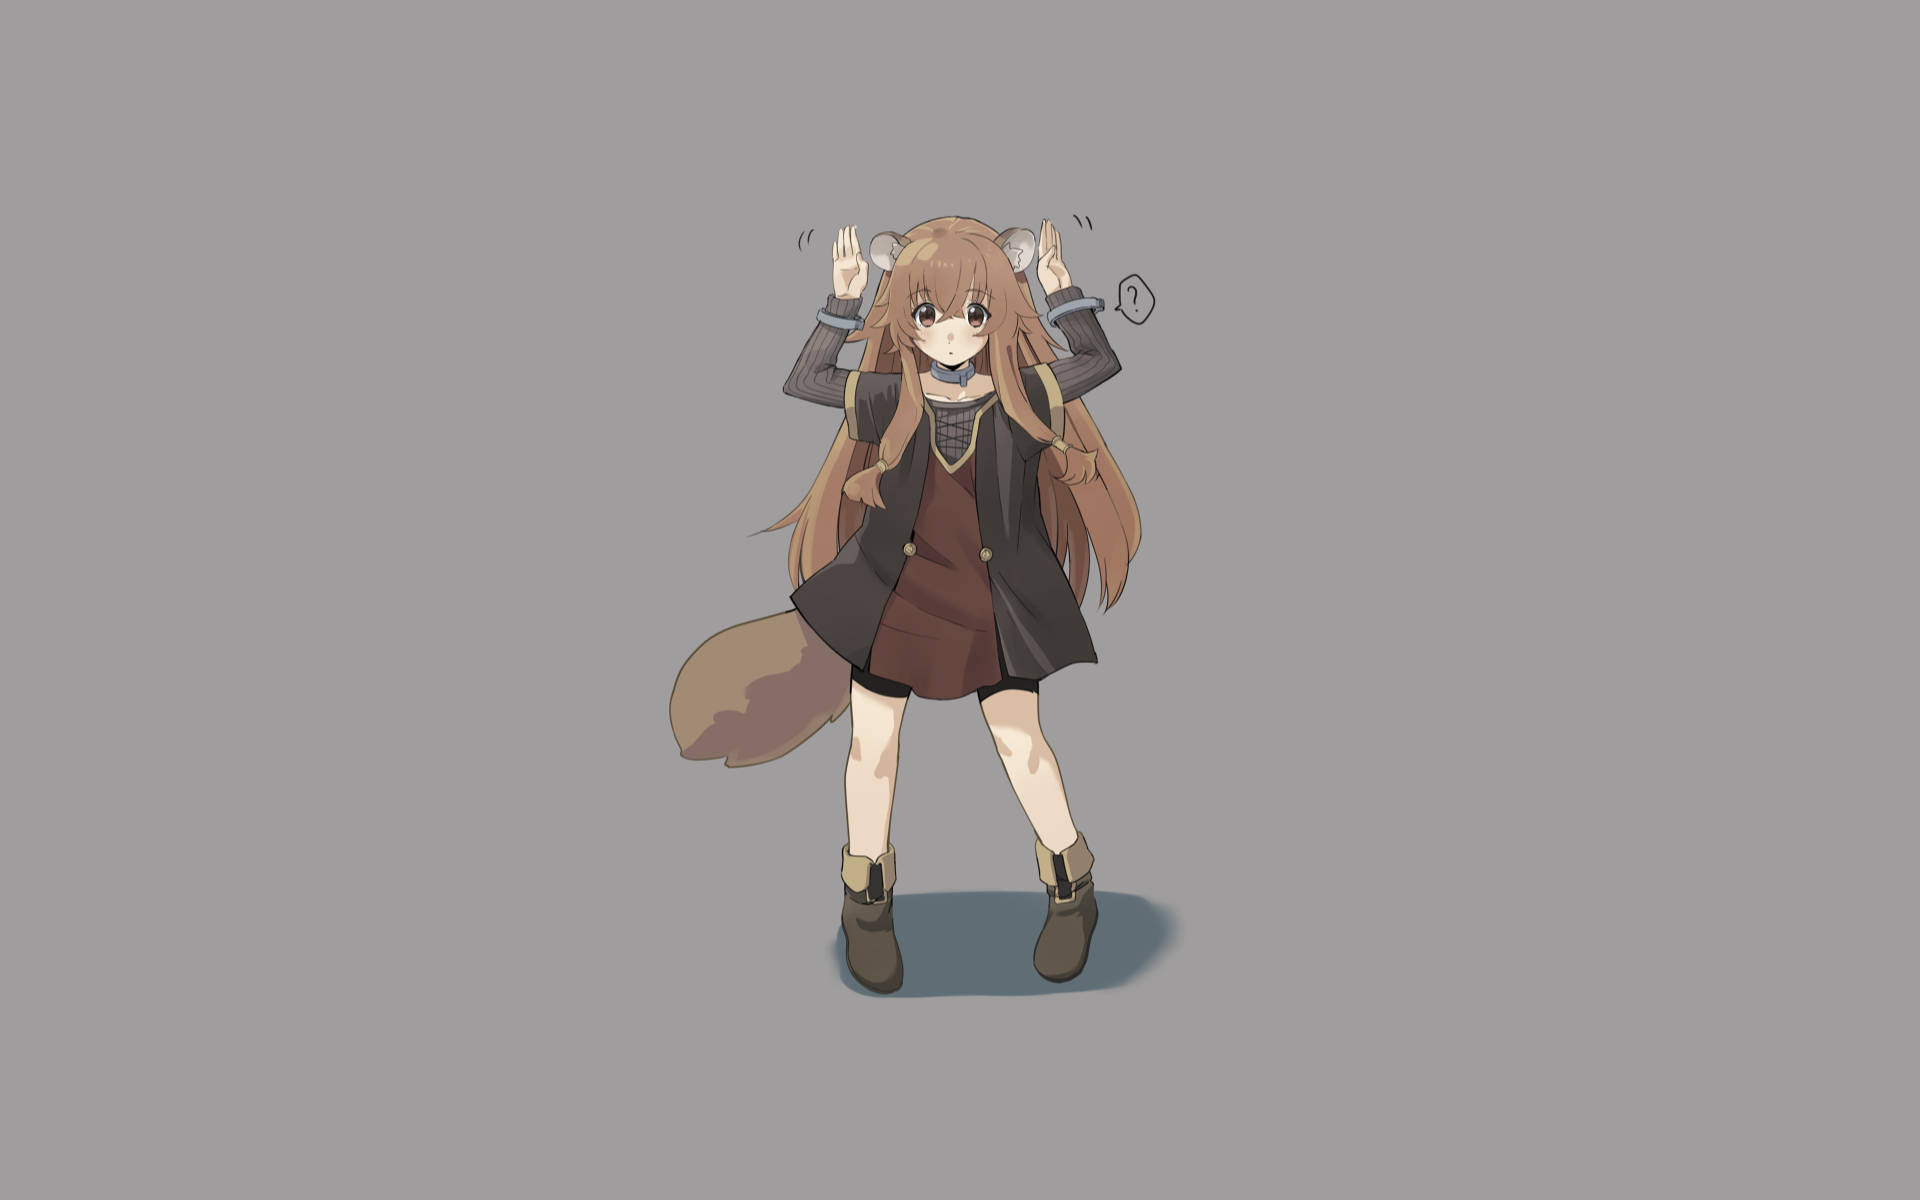 A Girl With Long Hair And A Coat